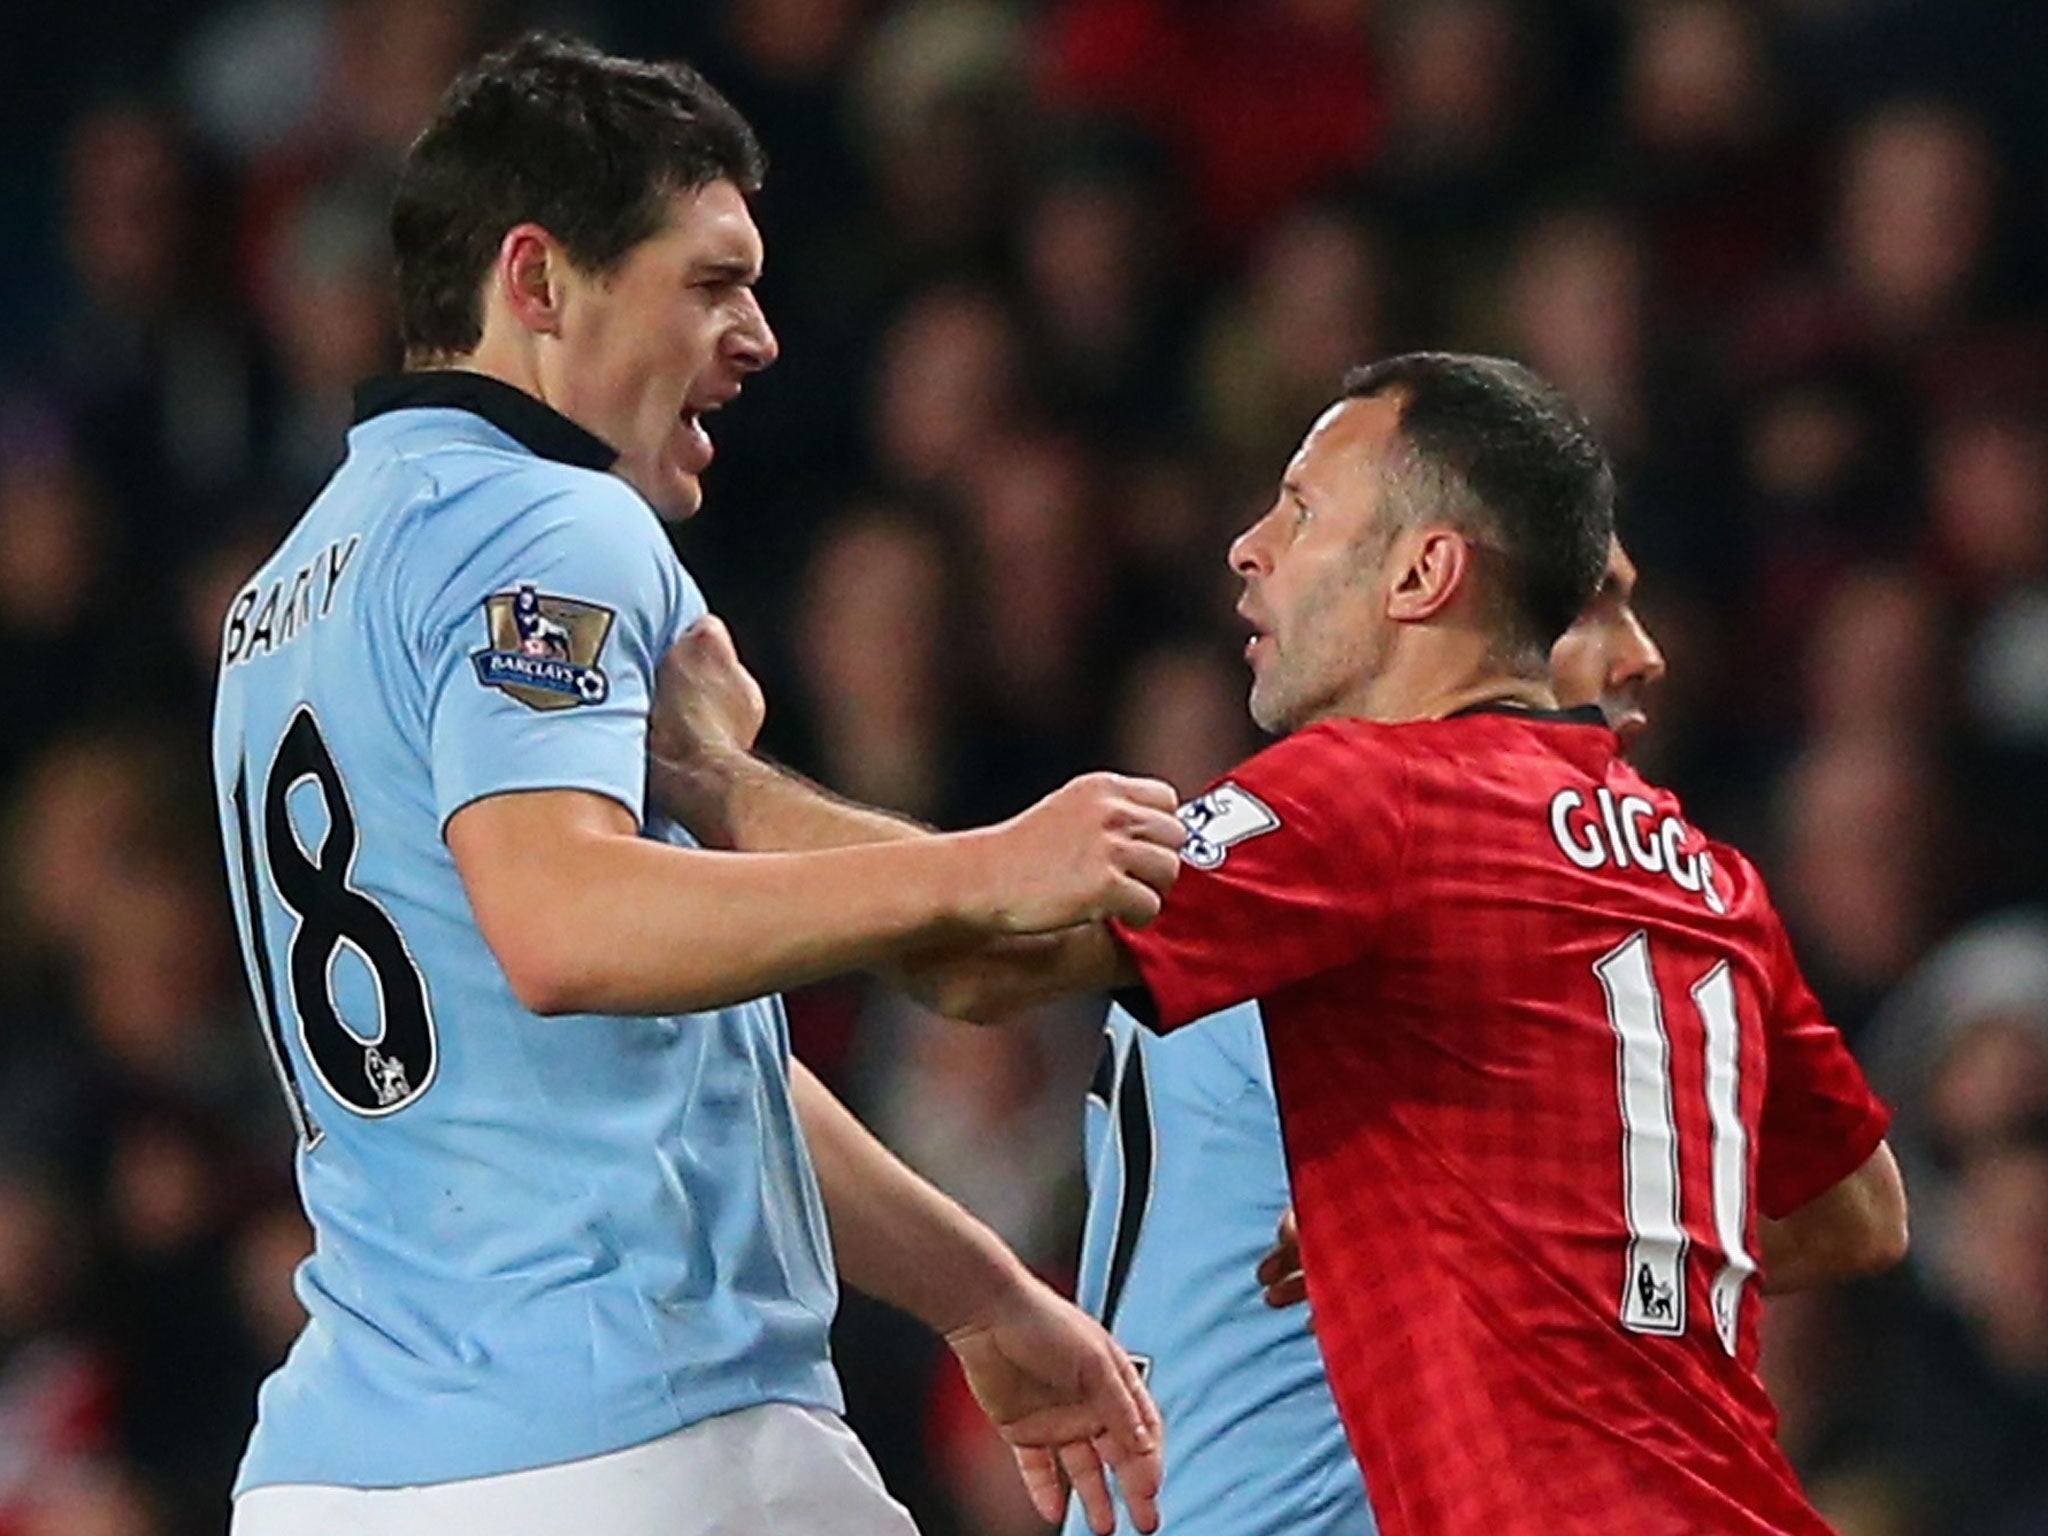 Blue murder: Gareth Barry clashes with Ryan Giggs at Old Trafford; ‘The frustration was certainly there,’ he admits